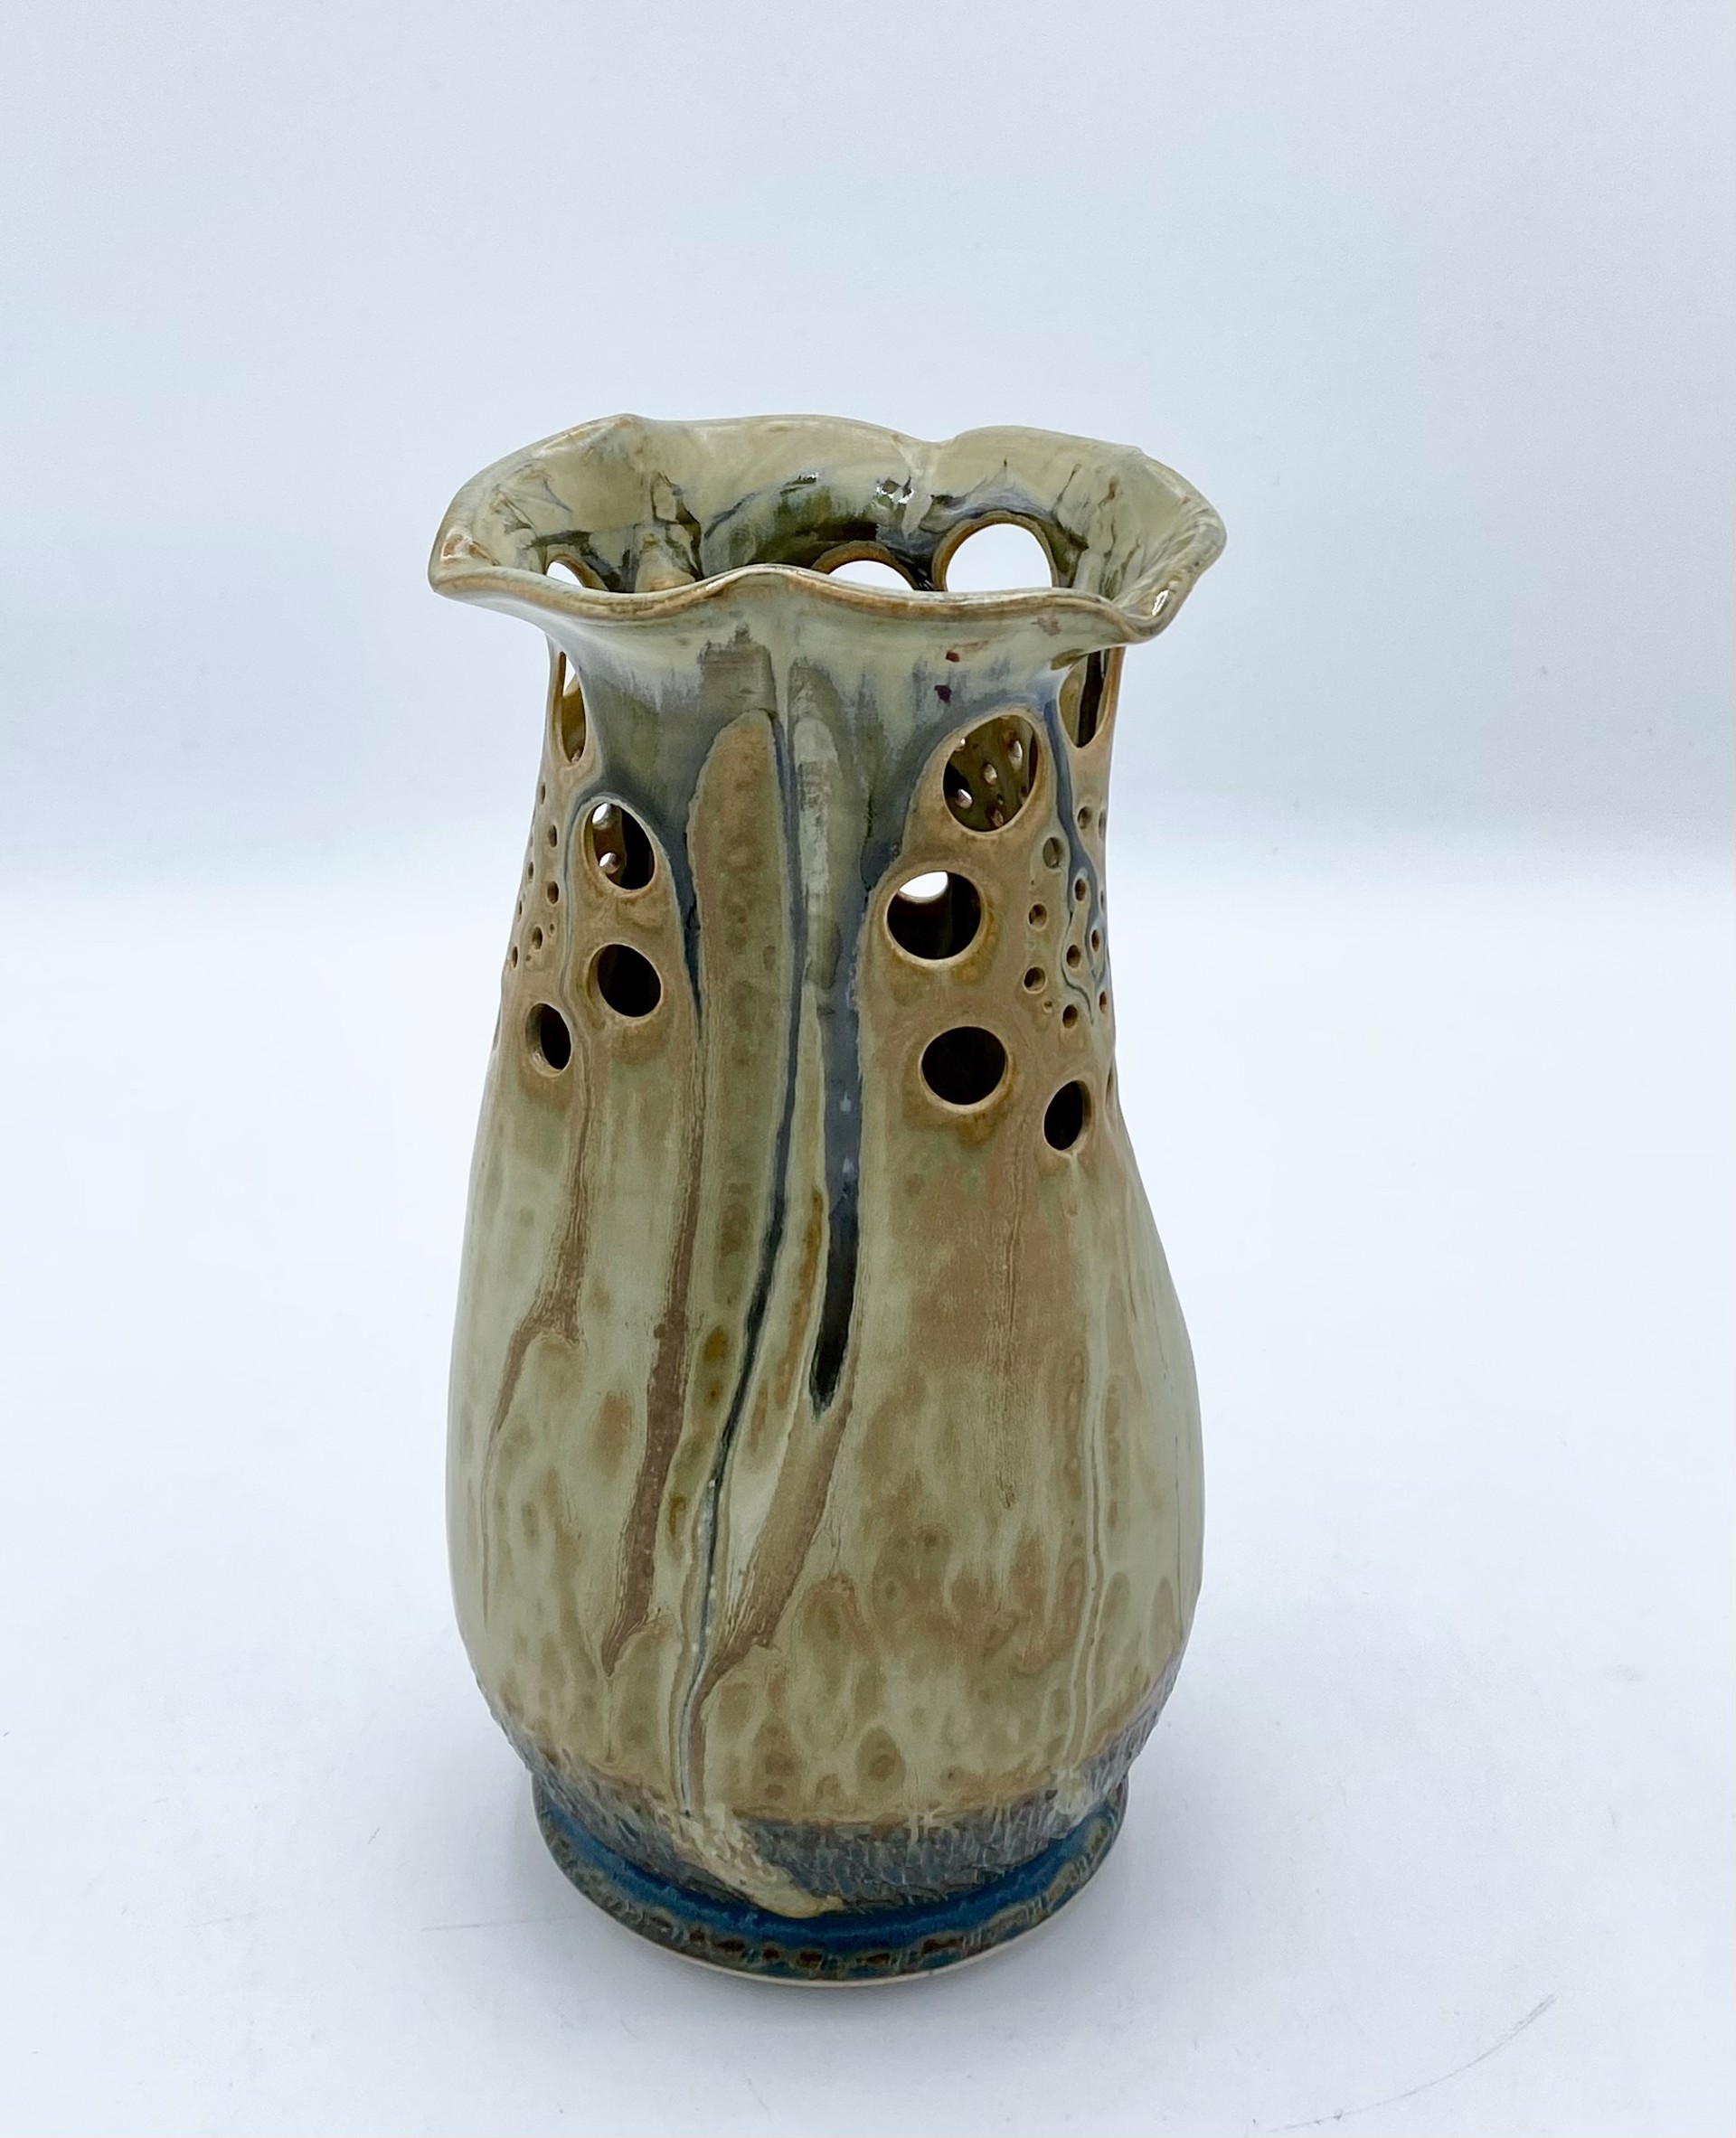 Small Vase 2 by J. Wilson Pottery